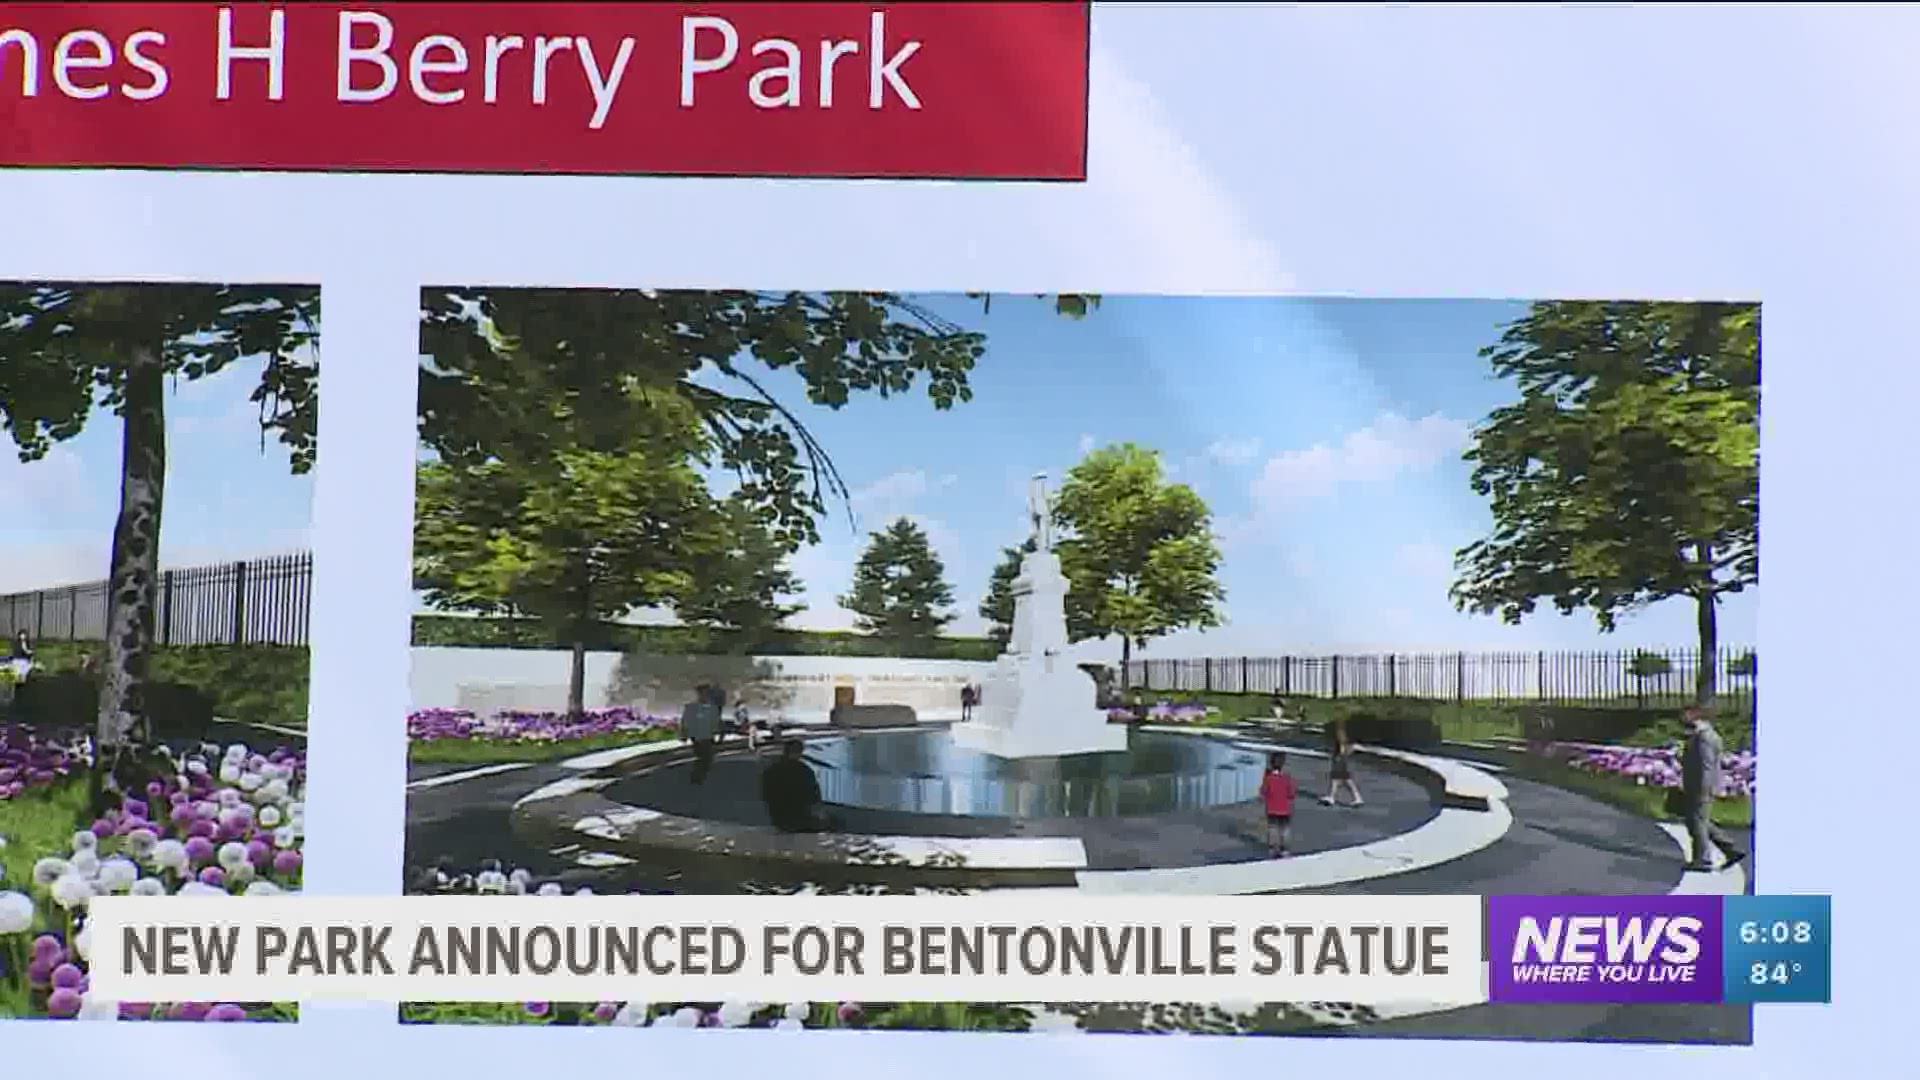 This will be the future home of the Confederate monument recently removed from the Bentonville Square. https://bit.ly/3iApNfd